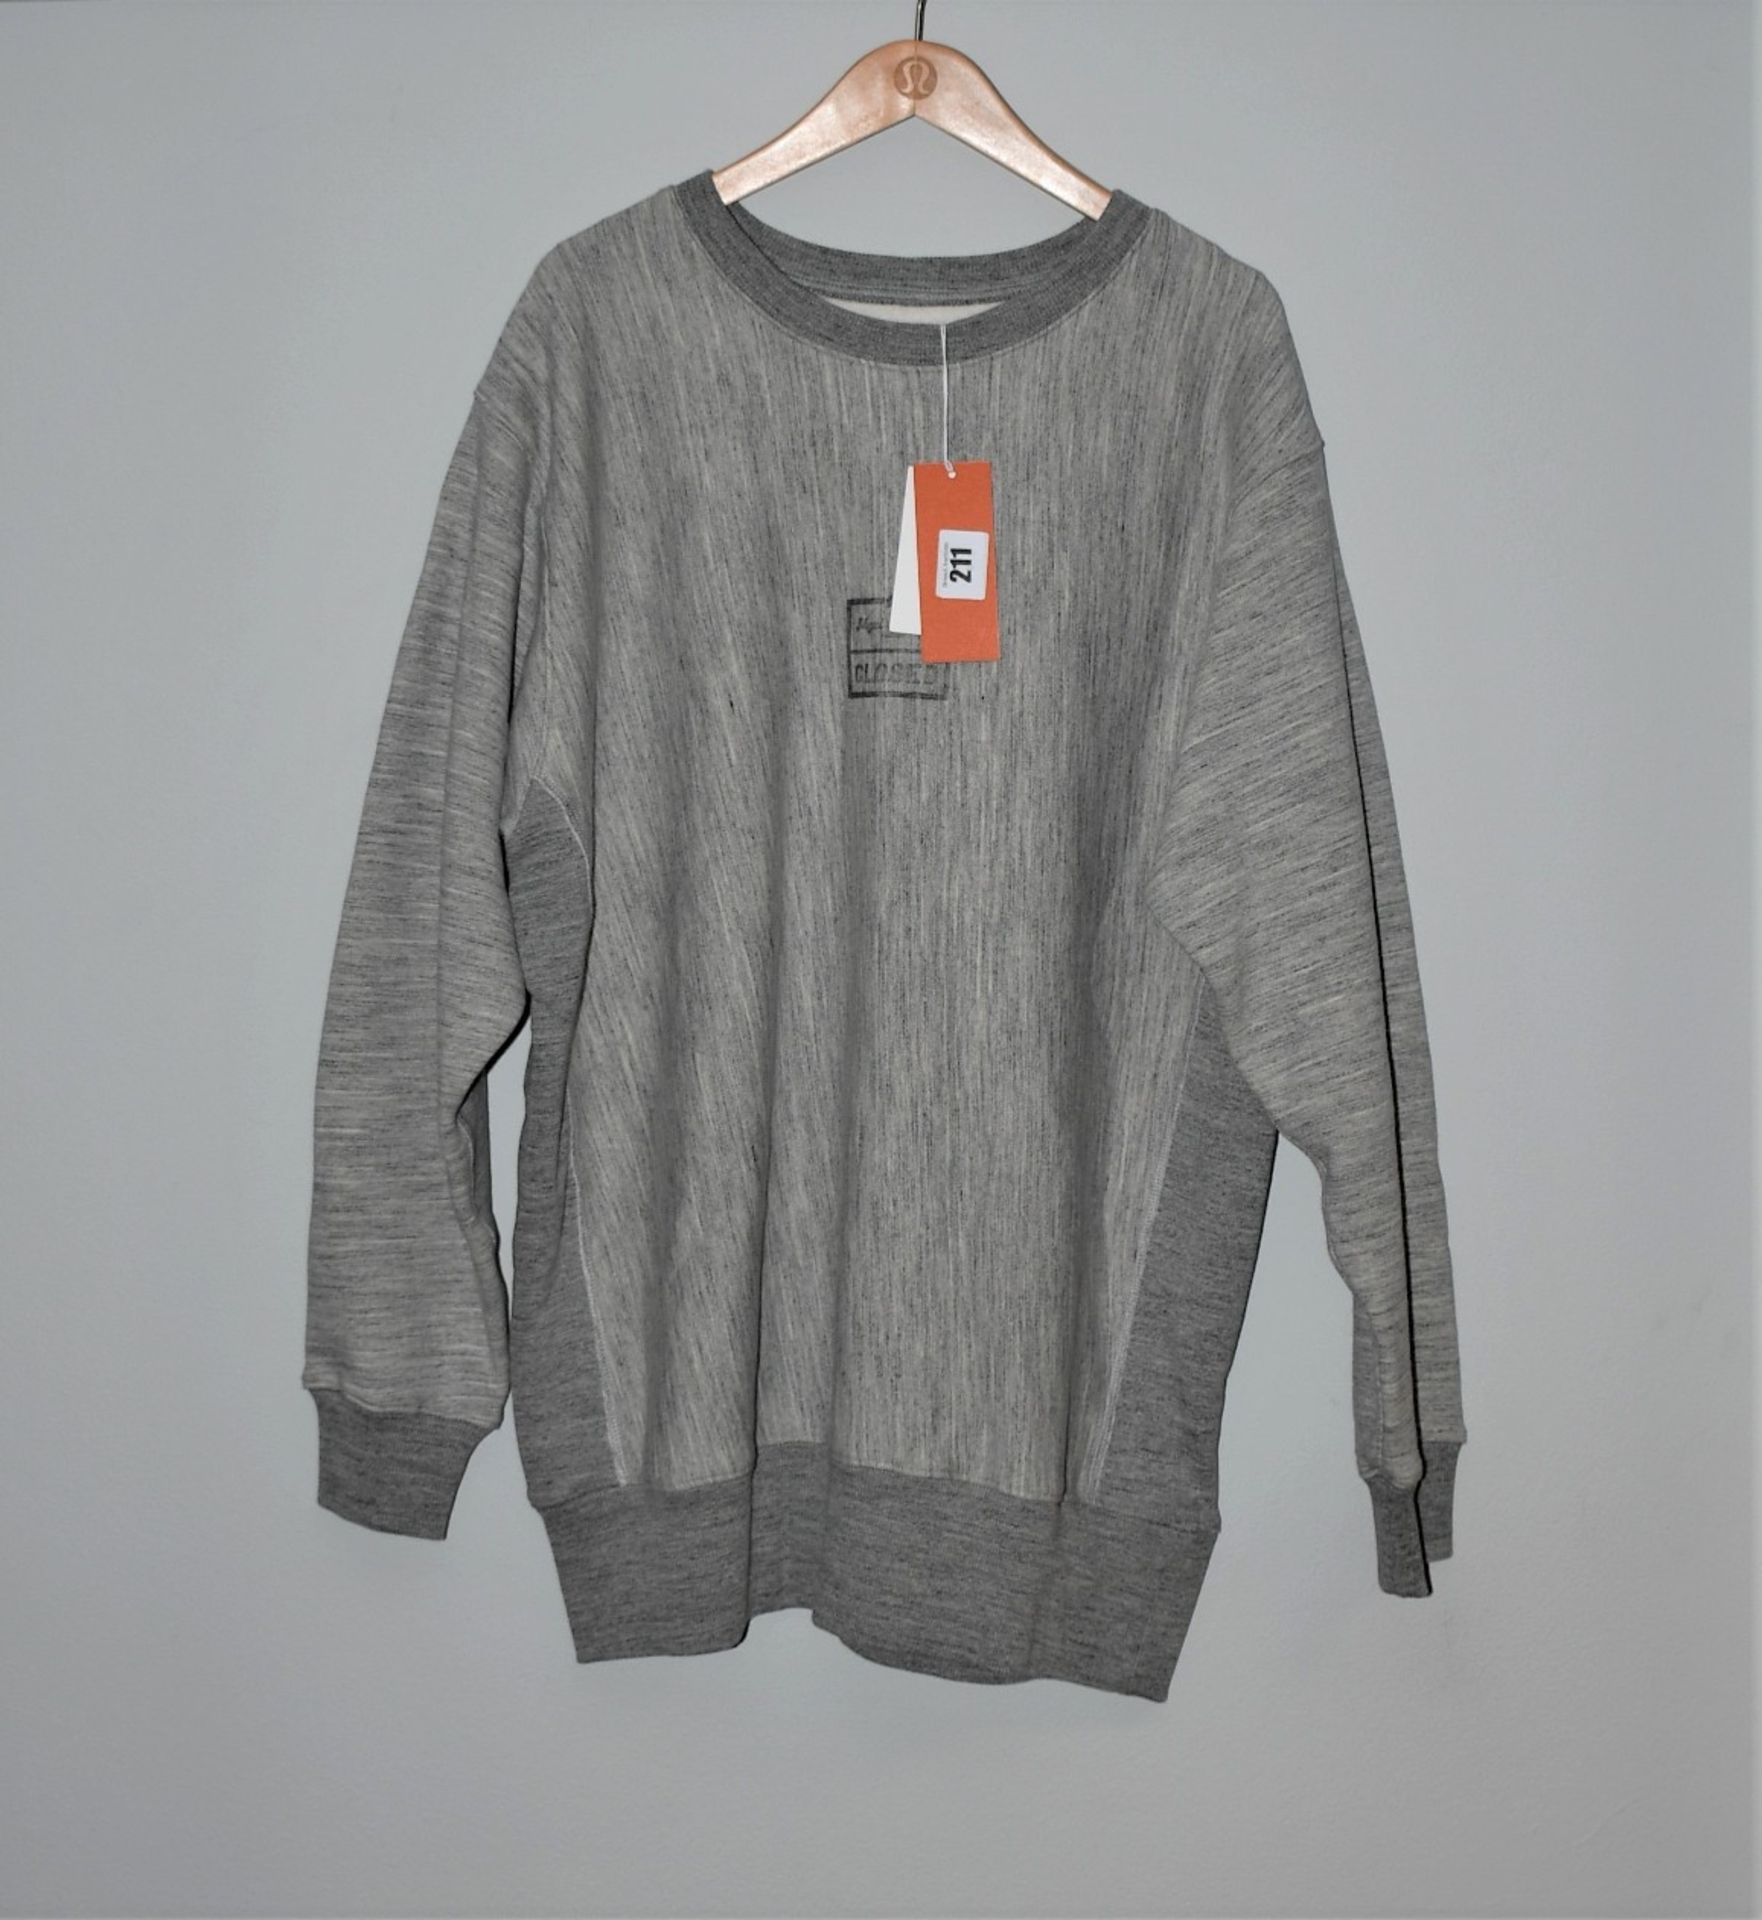 One as new Closed Nigel Cabourn sweatshirt (Size: unknown. Model: C85205-48V-20).